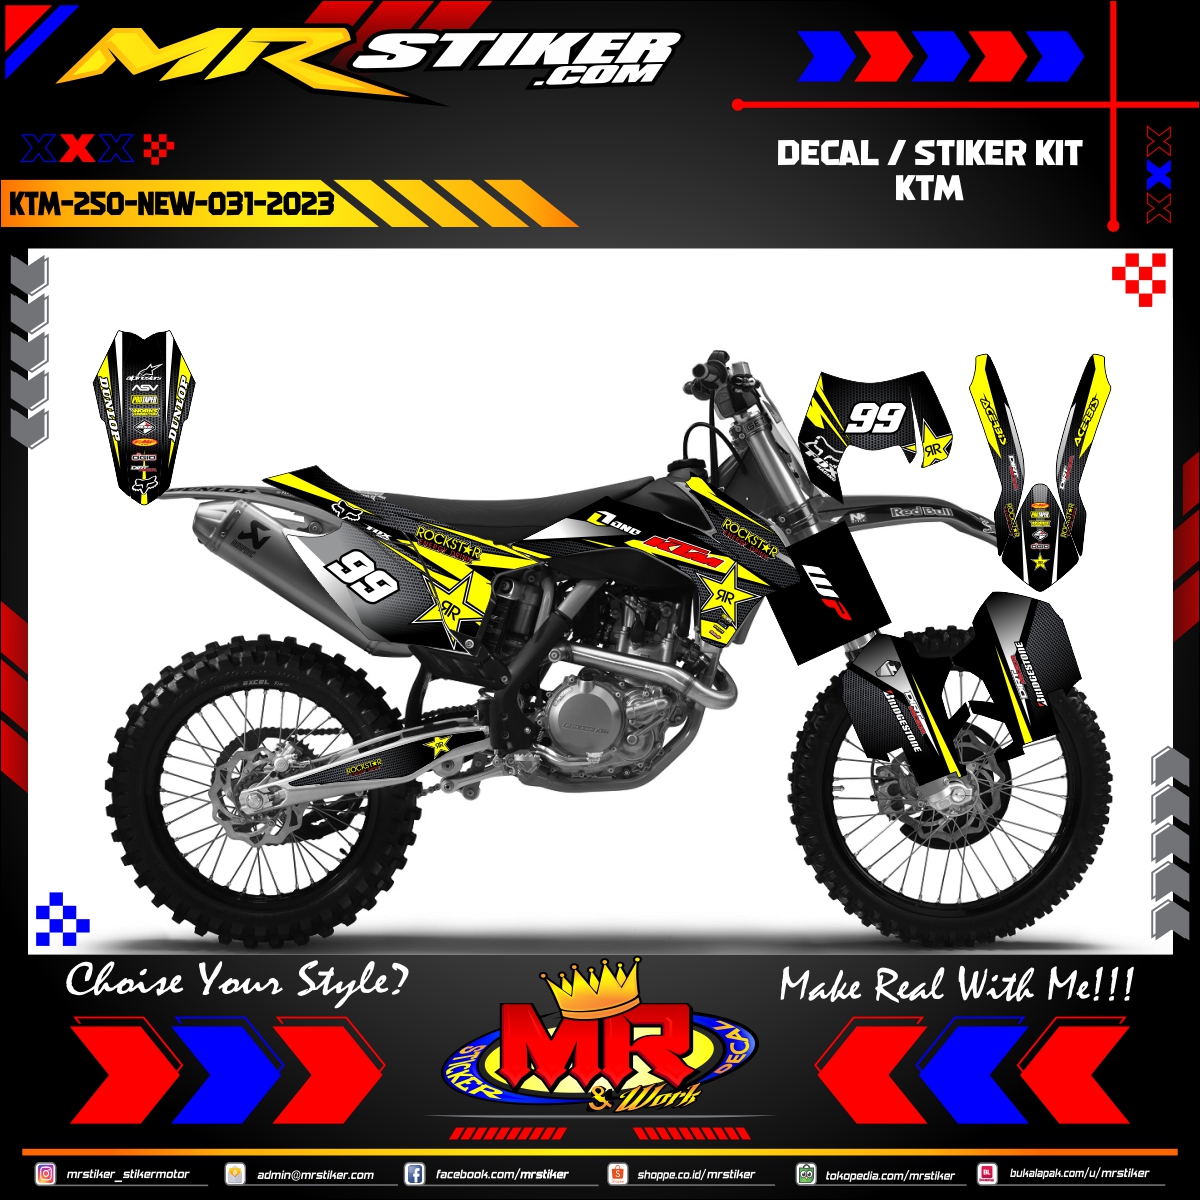 Stiker motor decal KTM 250 New Decal Rockstar Edition Carbon Graphic